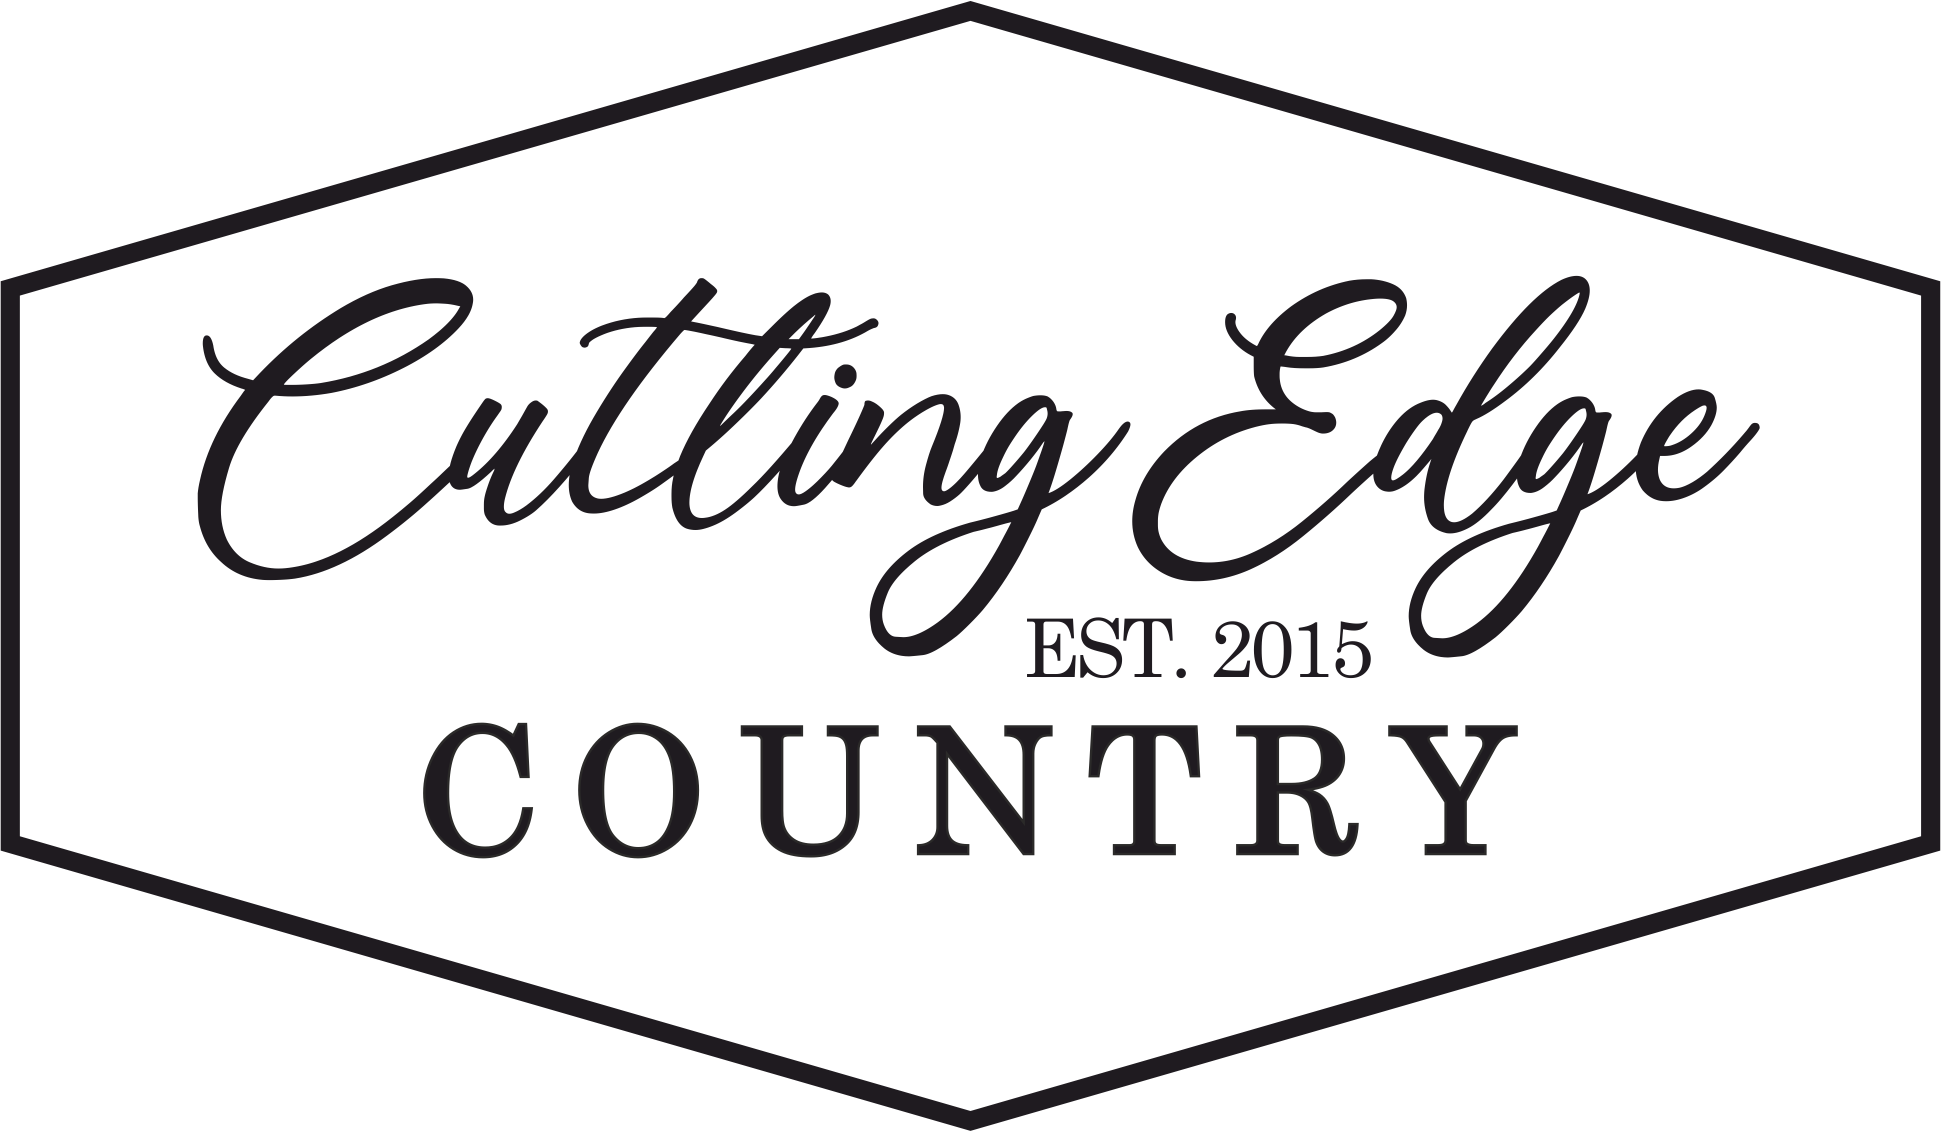 Cutting Edge Country